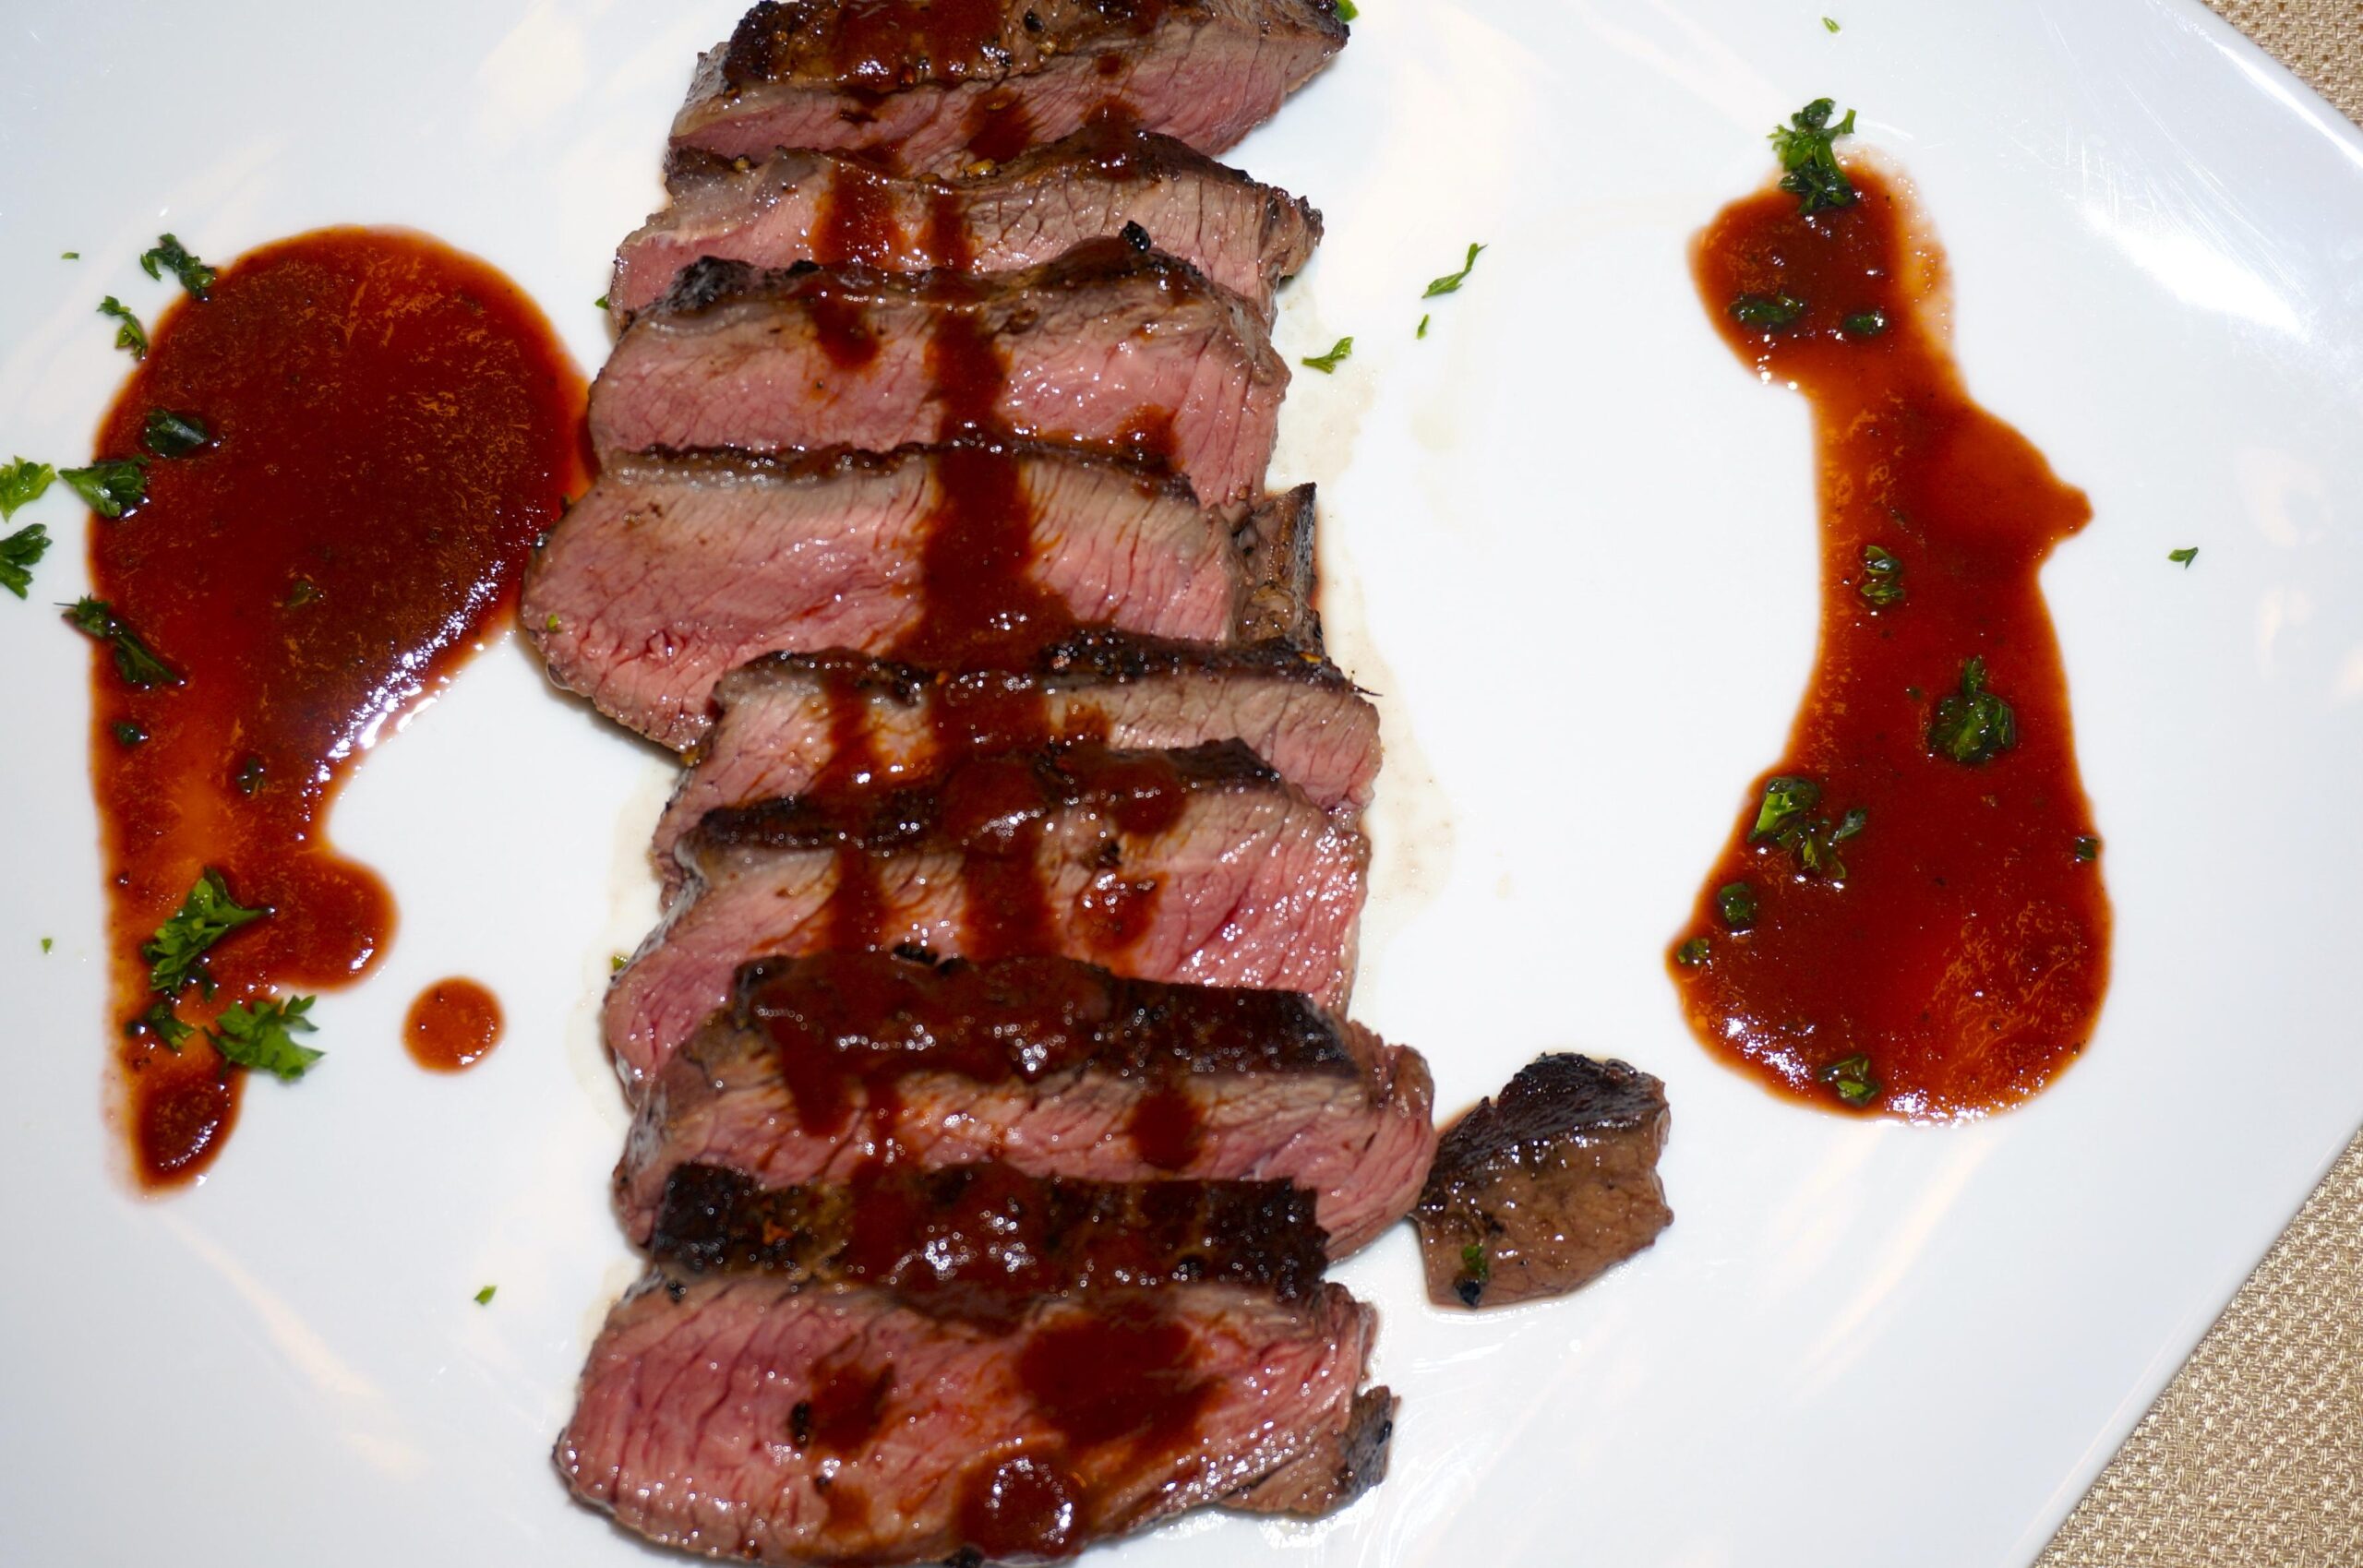  Elevate your steak game with a delicious homemade sauce